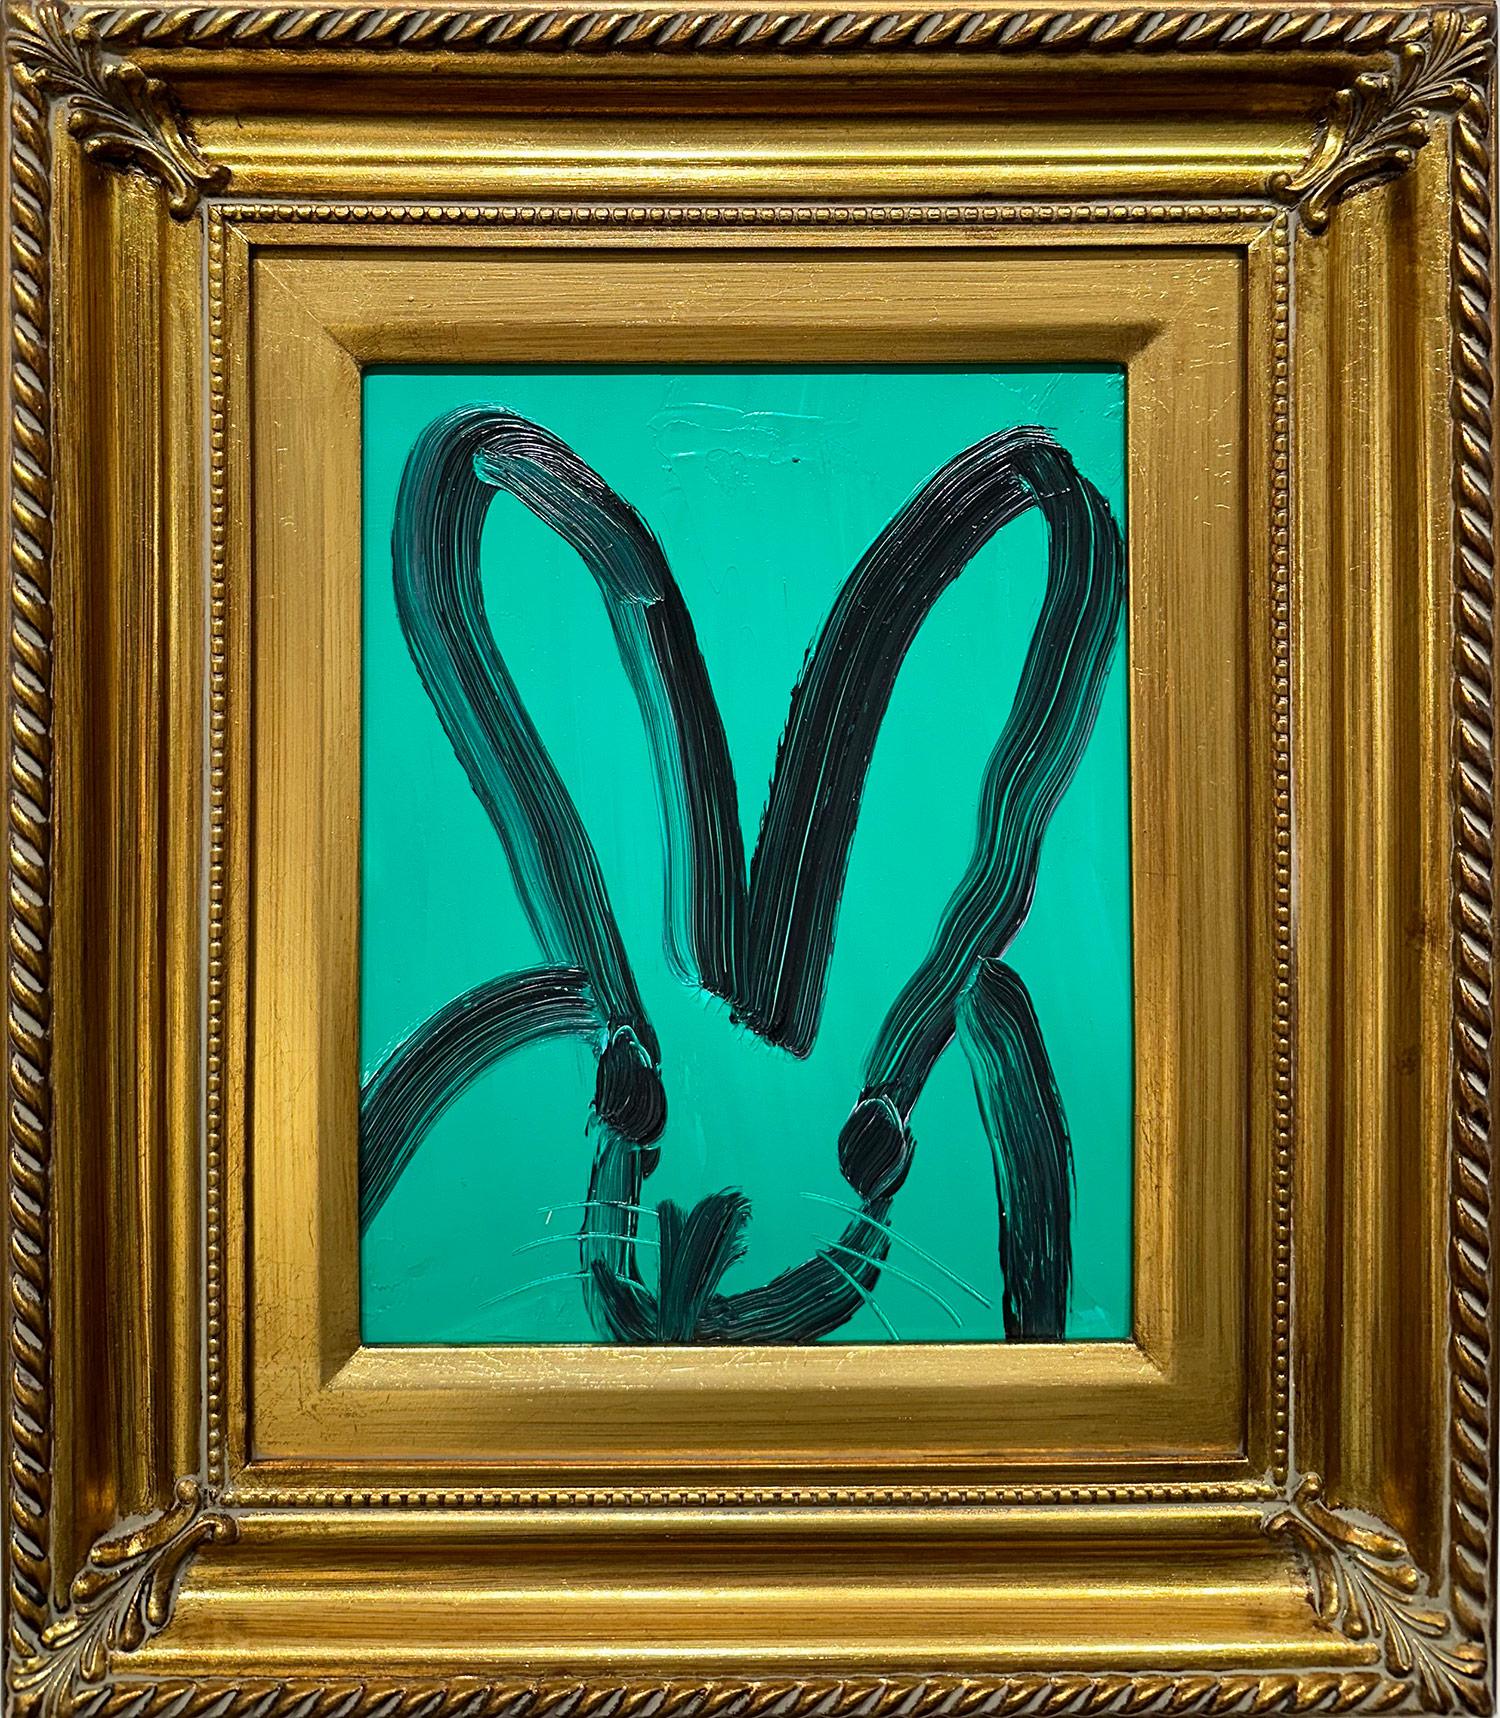 Hunt Slonem Animal Painting - "Ireland" Black Outline Bunny on Emerald Green Background Oil Painting Wood